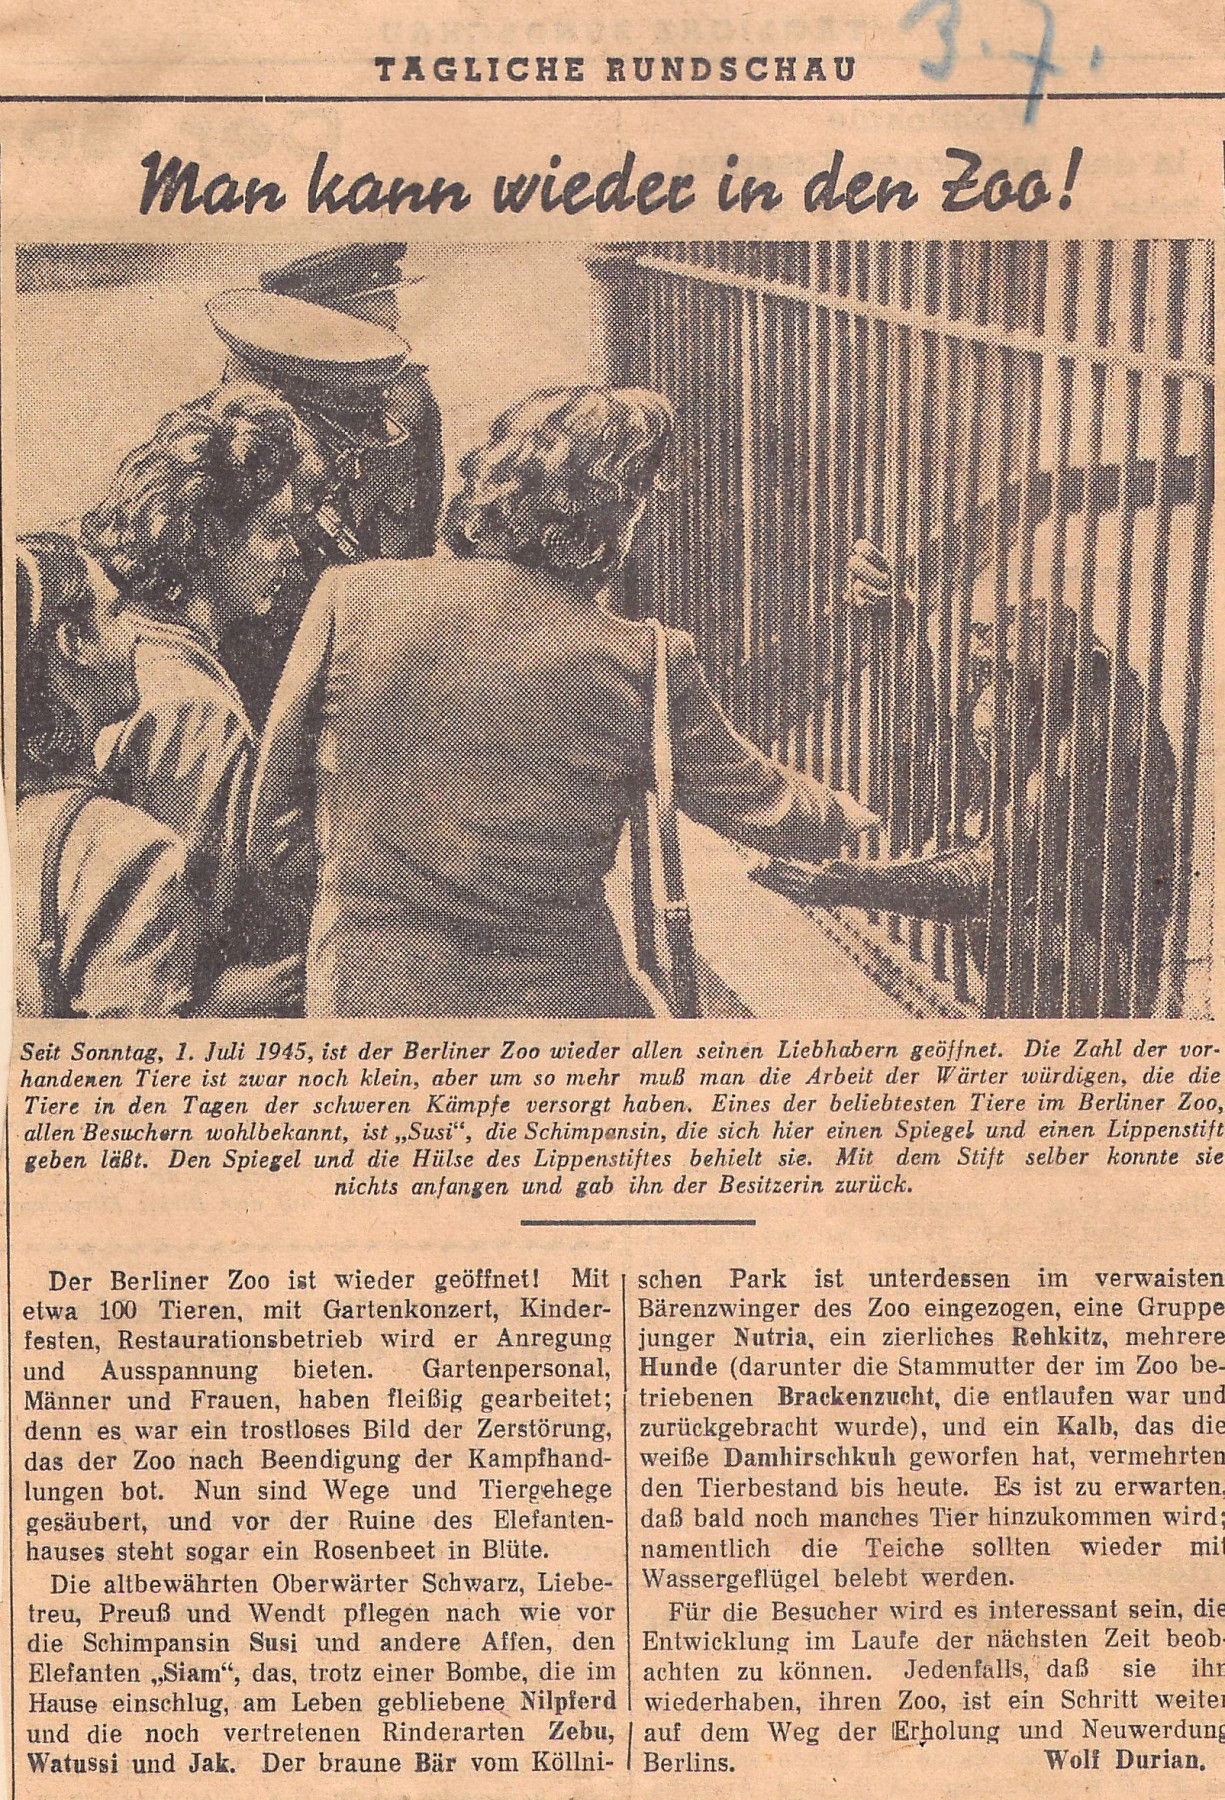 Newspaper clipping. Title: We can go to the zoo again! Illustration: Five people in front of an enclosure, one placing something in a monkey's outstretched hand.